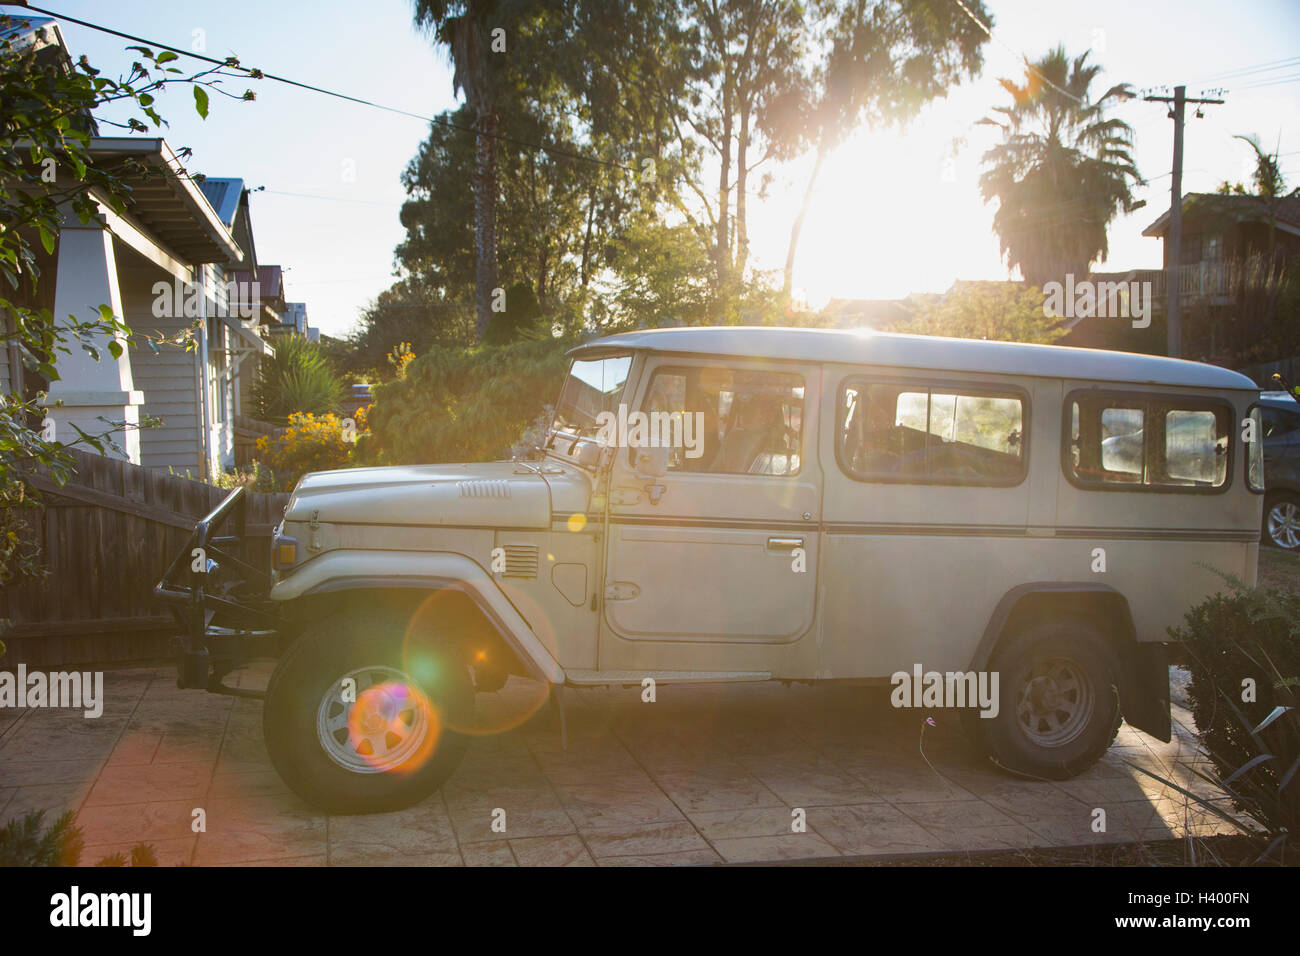 Sports utility vehicle parked outside house by trees on sunny day, Melbourne, Victoria, Australia Stock Photo